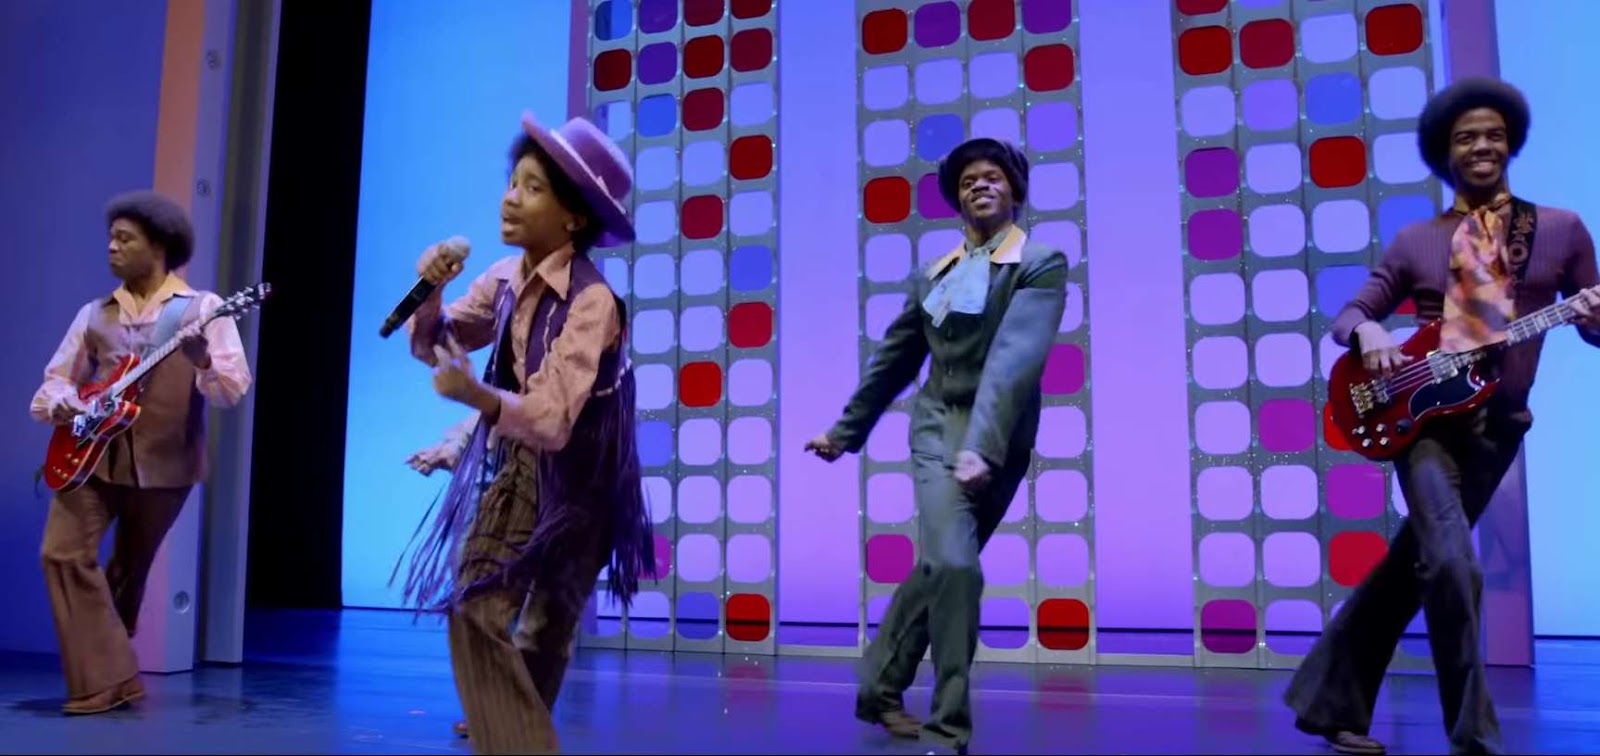 Part of a play called Motown the Musical